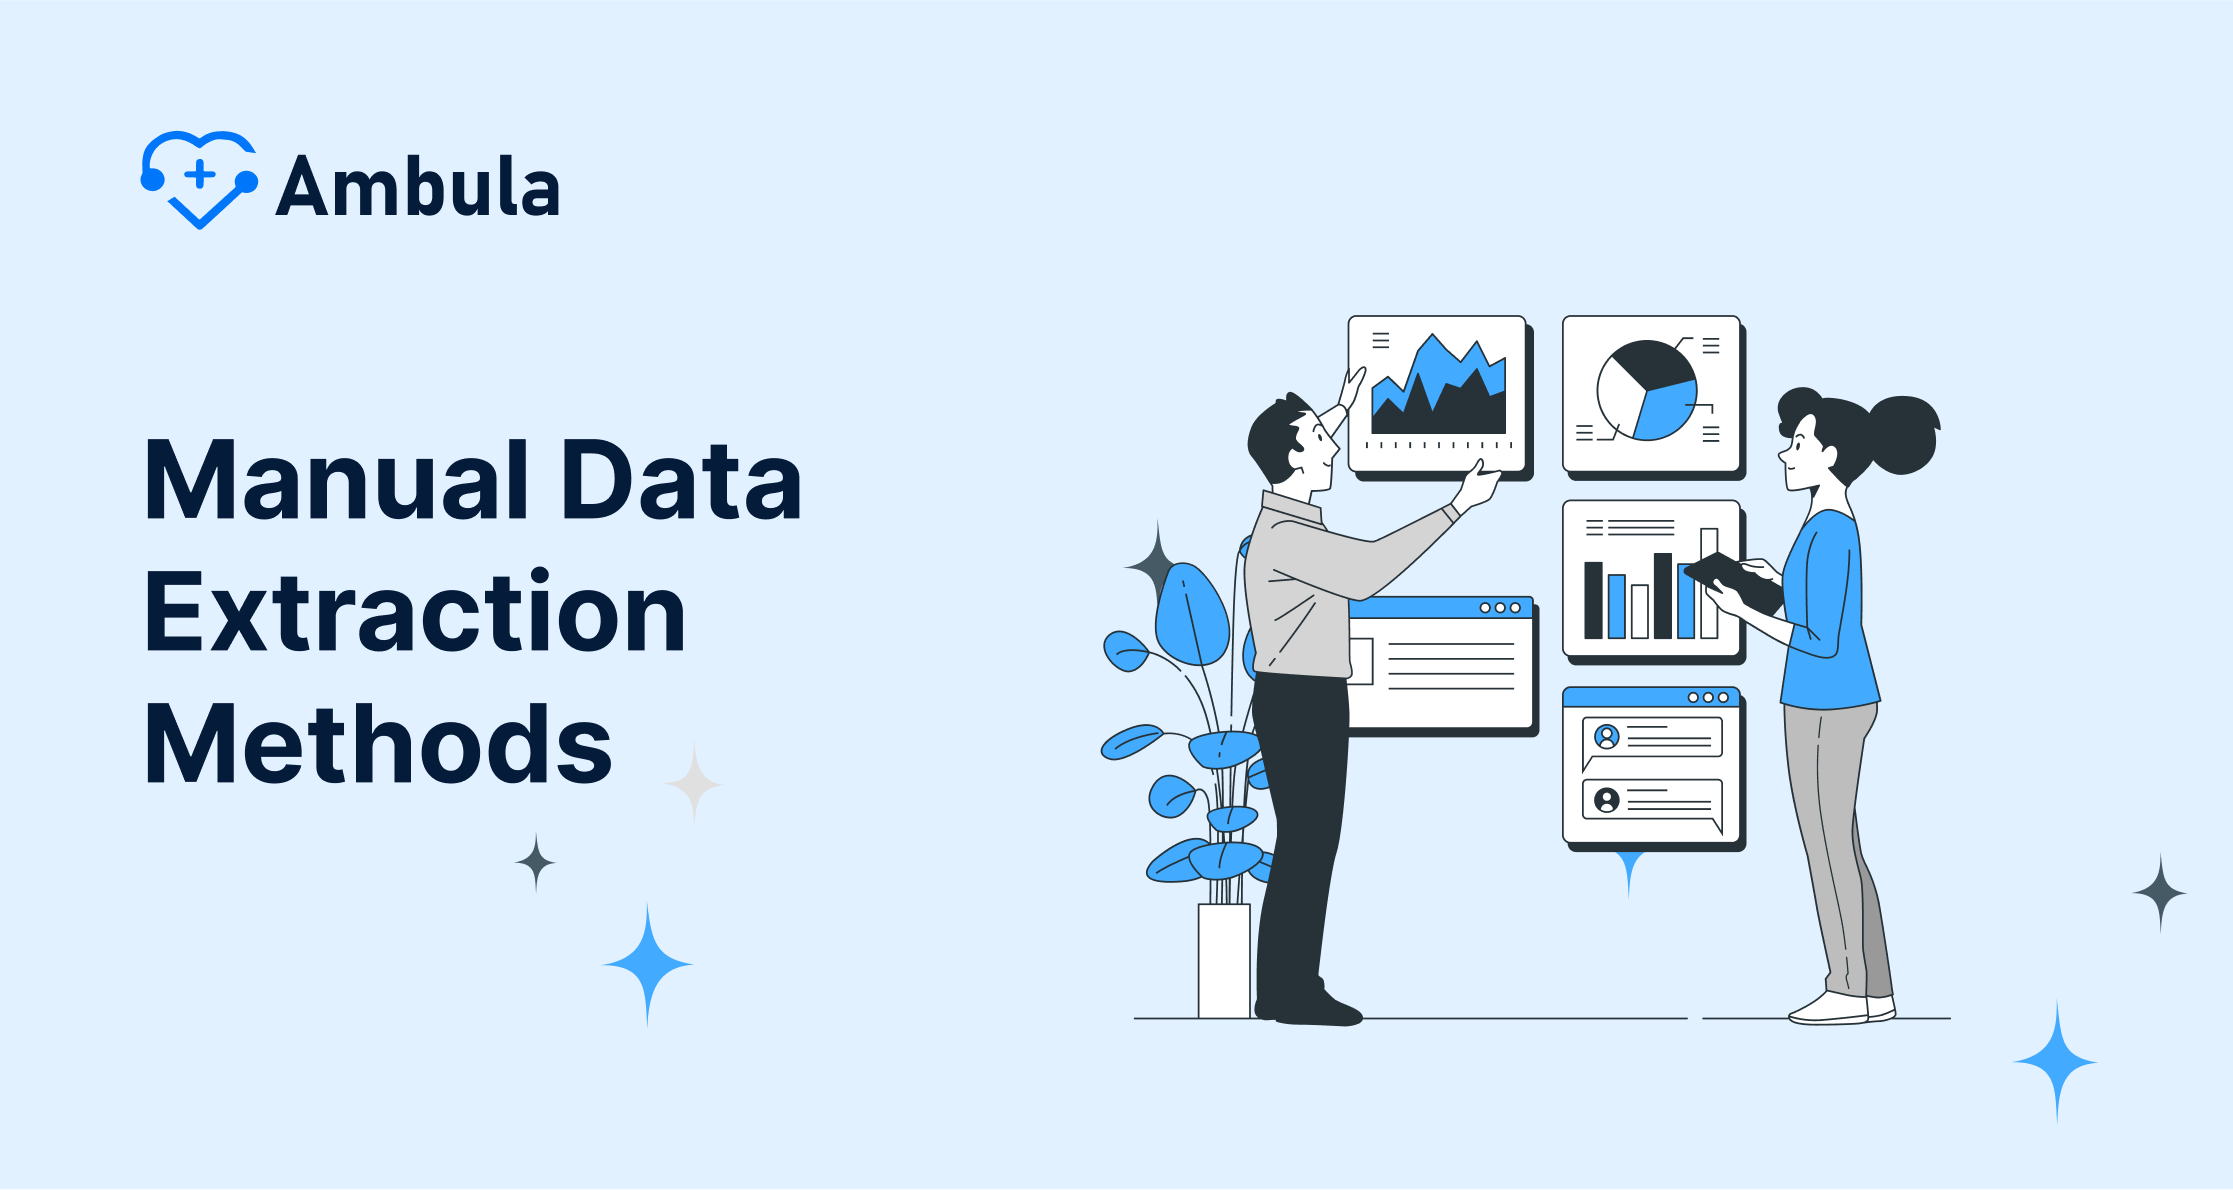 Manual Data Extraction Methods